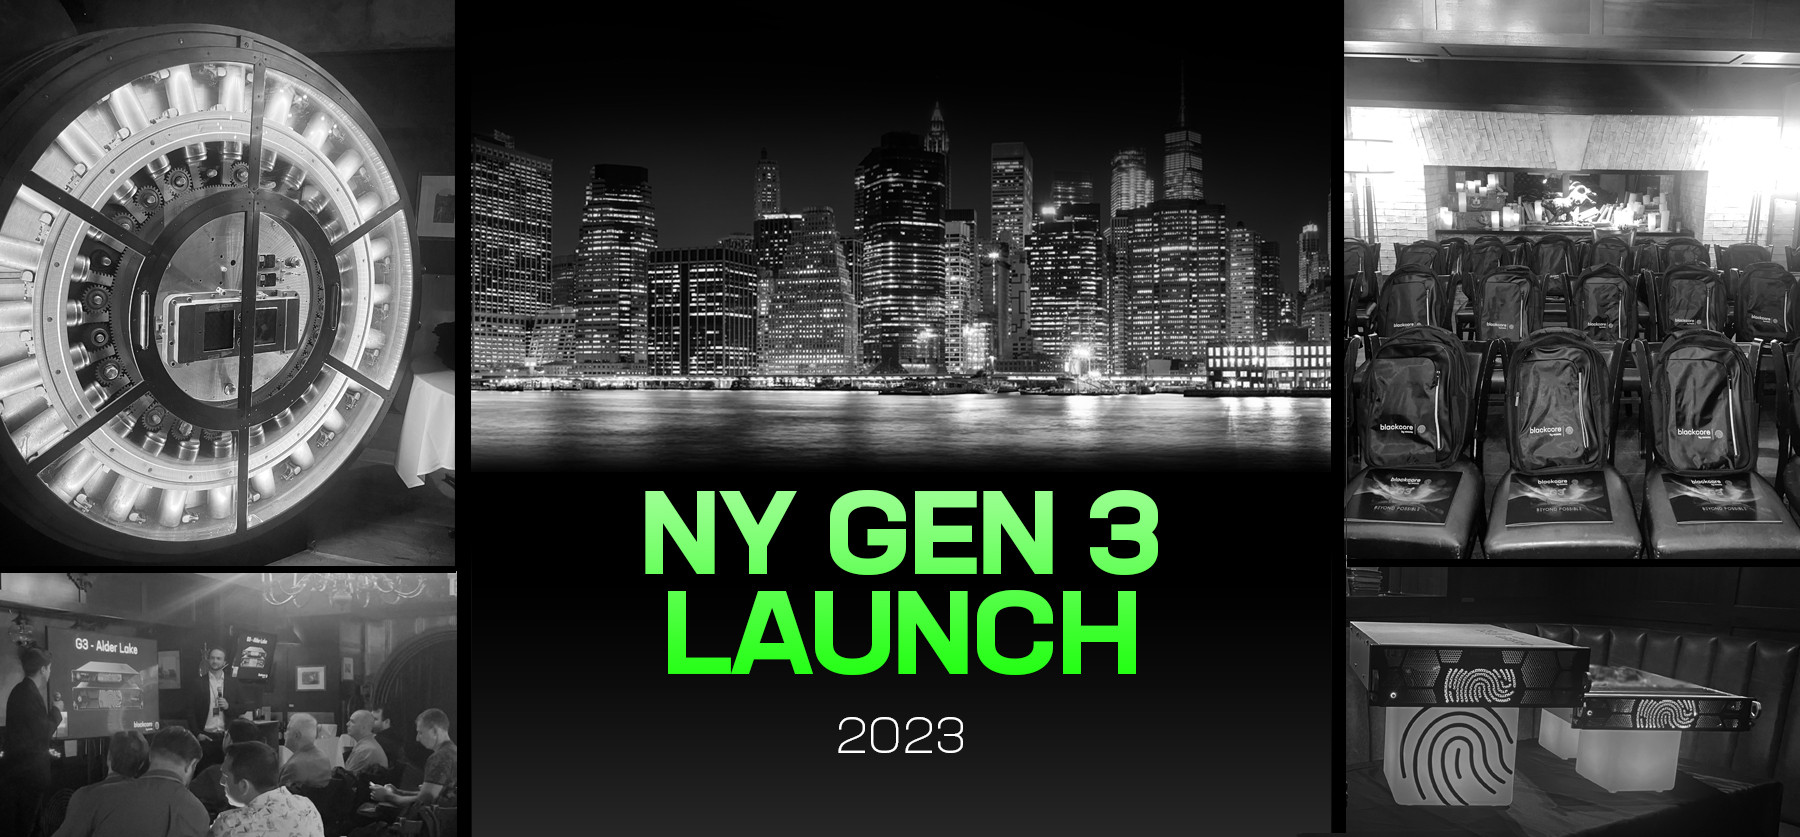 GEN 3 Launches in NYC image